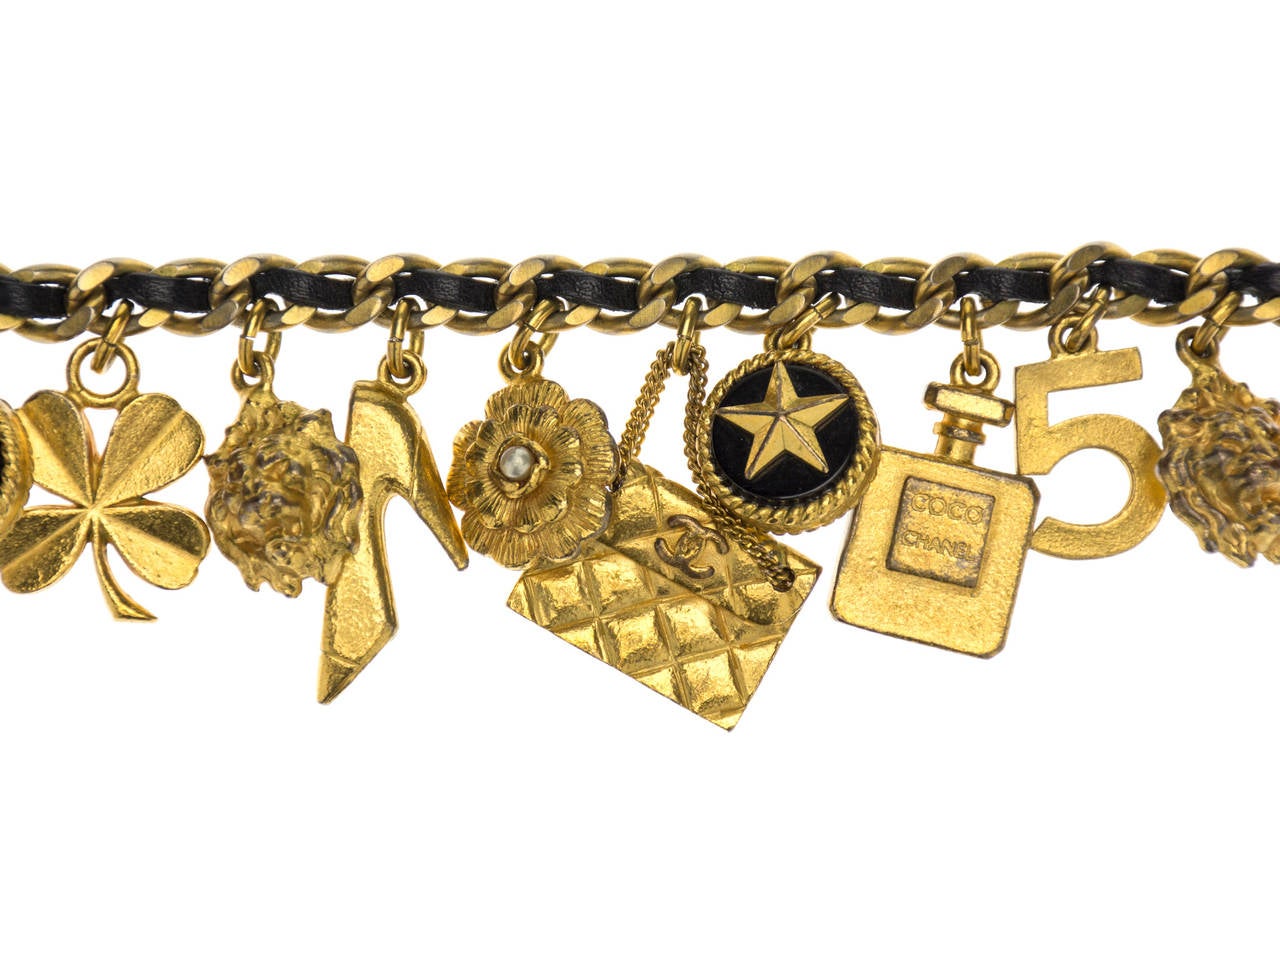 Chanel Vintage Gold Charm Bracelet In Excellent Condition For Sale In San Diego, CA